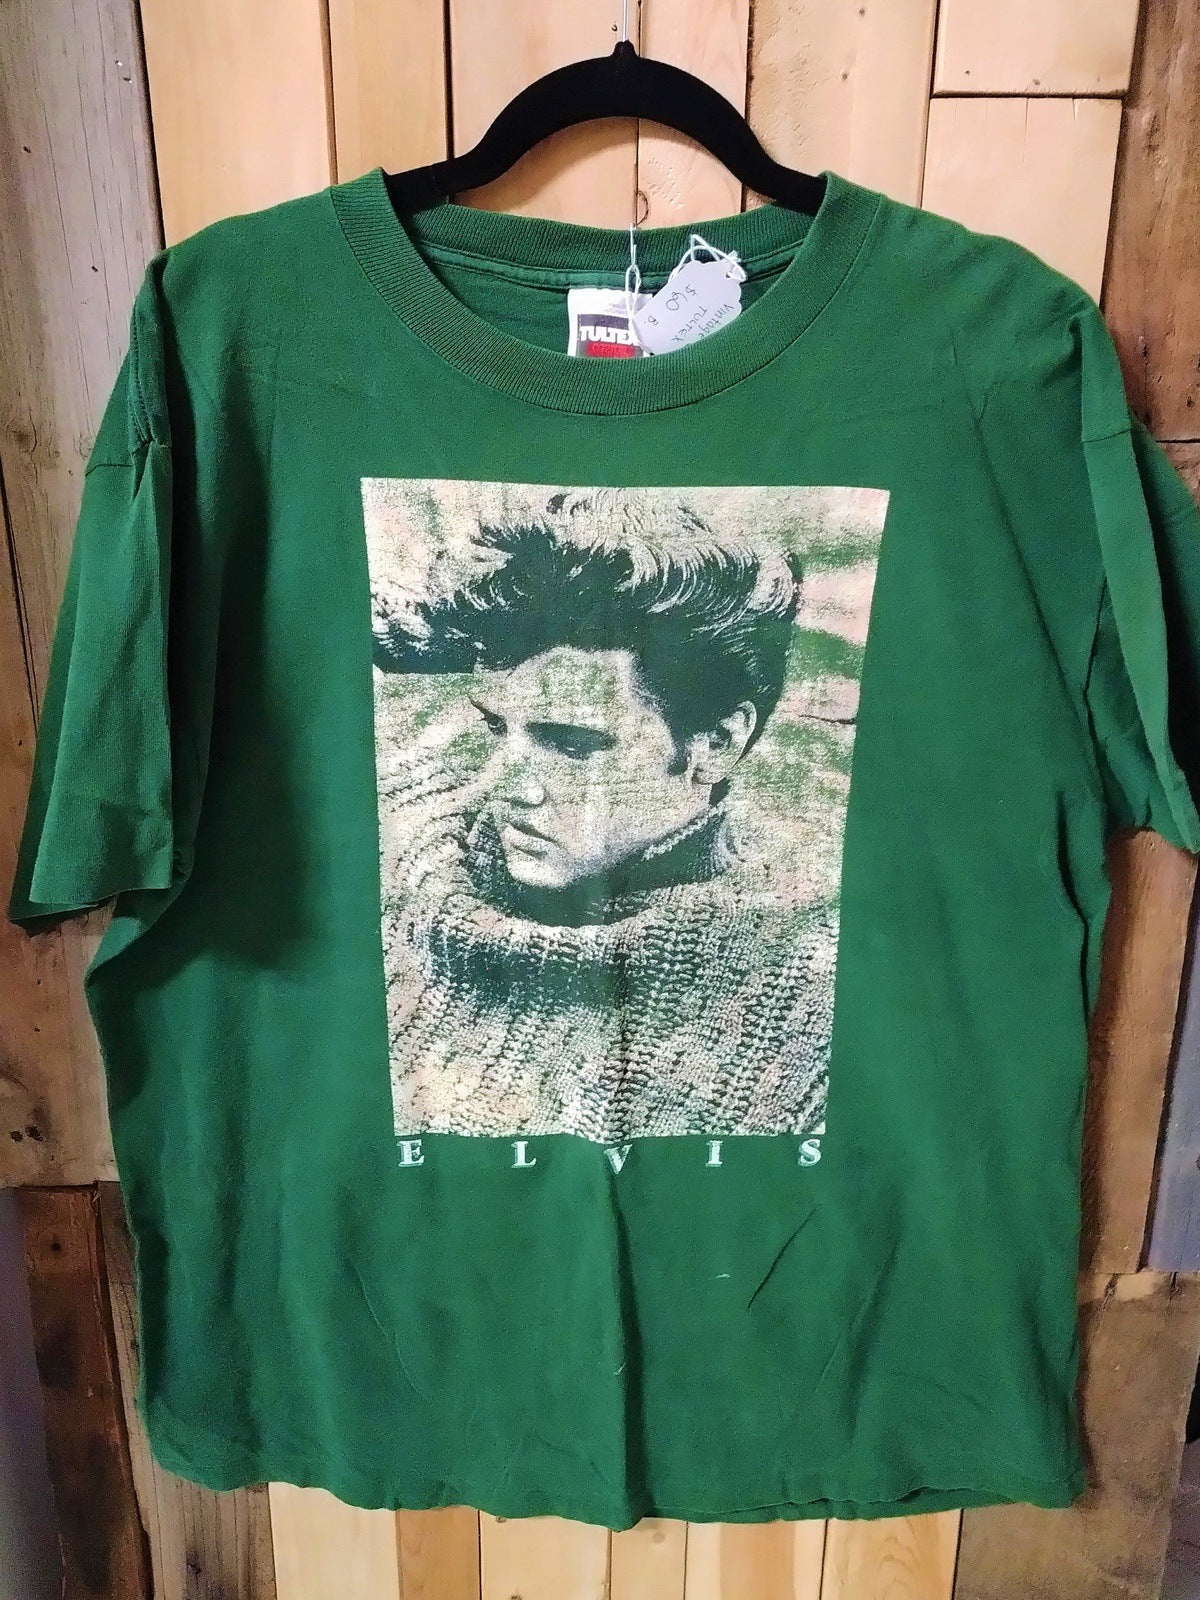 Elvis T Shirt Size XL- Small Stains on front As Is